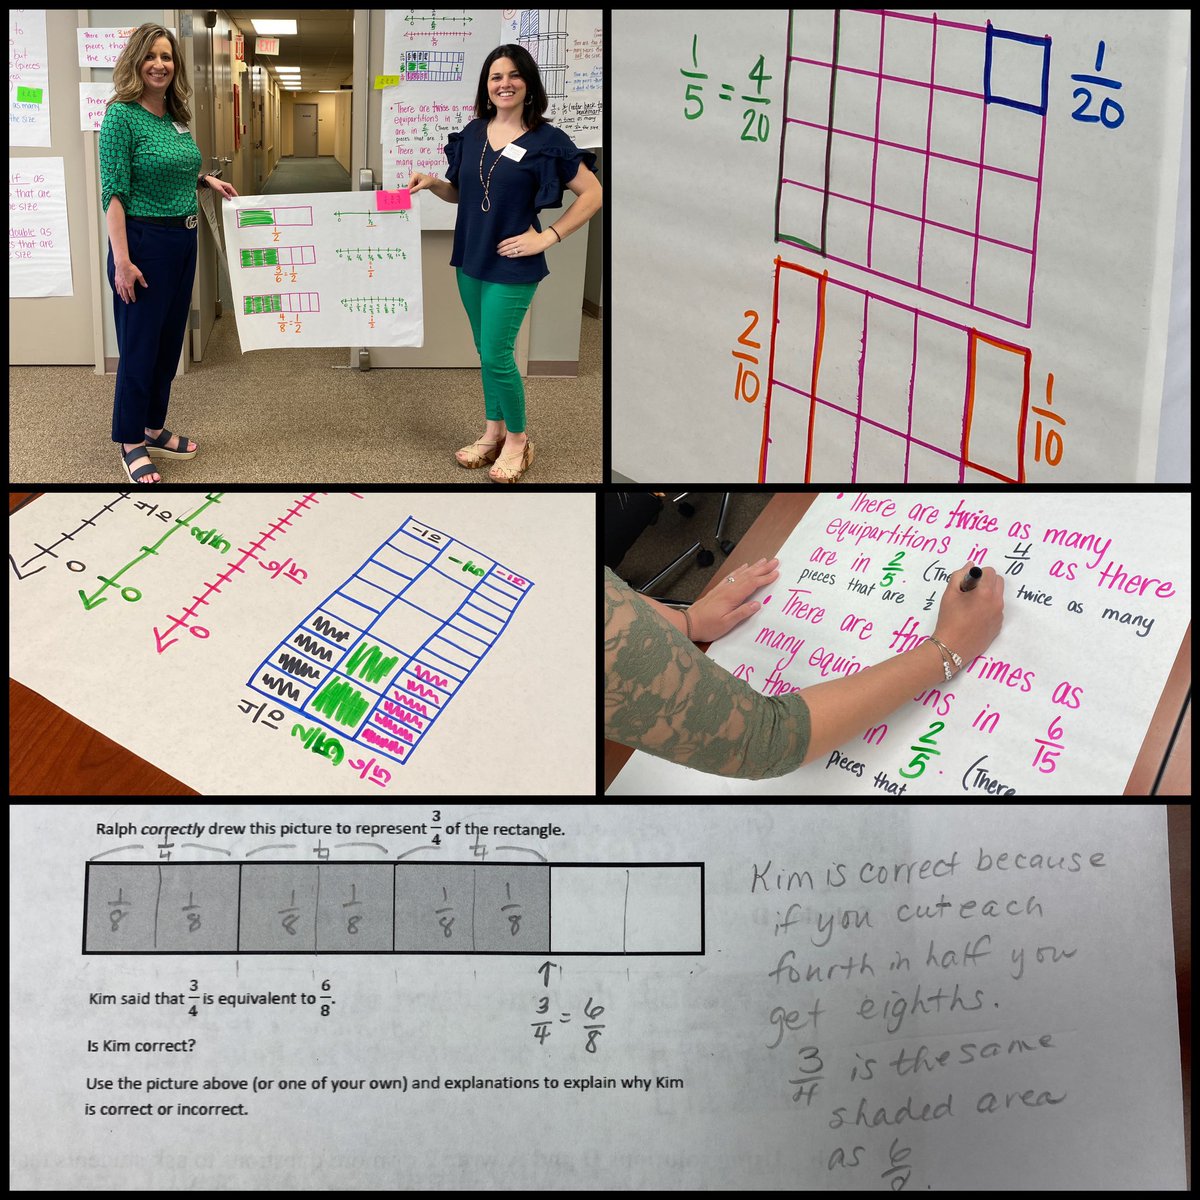 Equivalence with visual, fraction models lookin’ like masterpieces in OGAP Fractional! 🎨🖌️ 
#MathSquadGoals
@ellen_benefield
@LeshellSmith
@lmcd50
@MathOnThePorch
@MelAGCampbell
@AmstiUAH
@AMSTI4all
@OGAP_Philly
@AlabamaAchieves